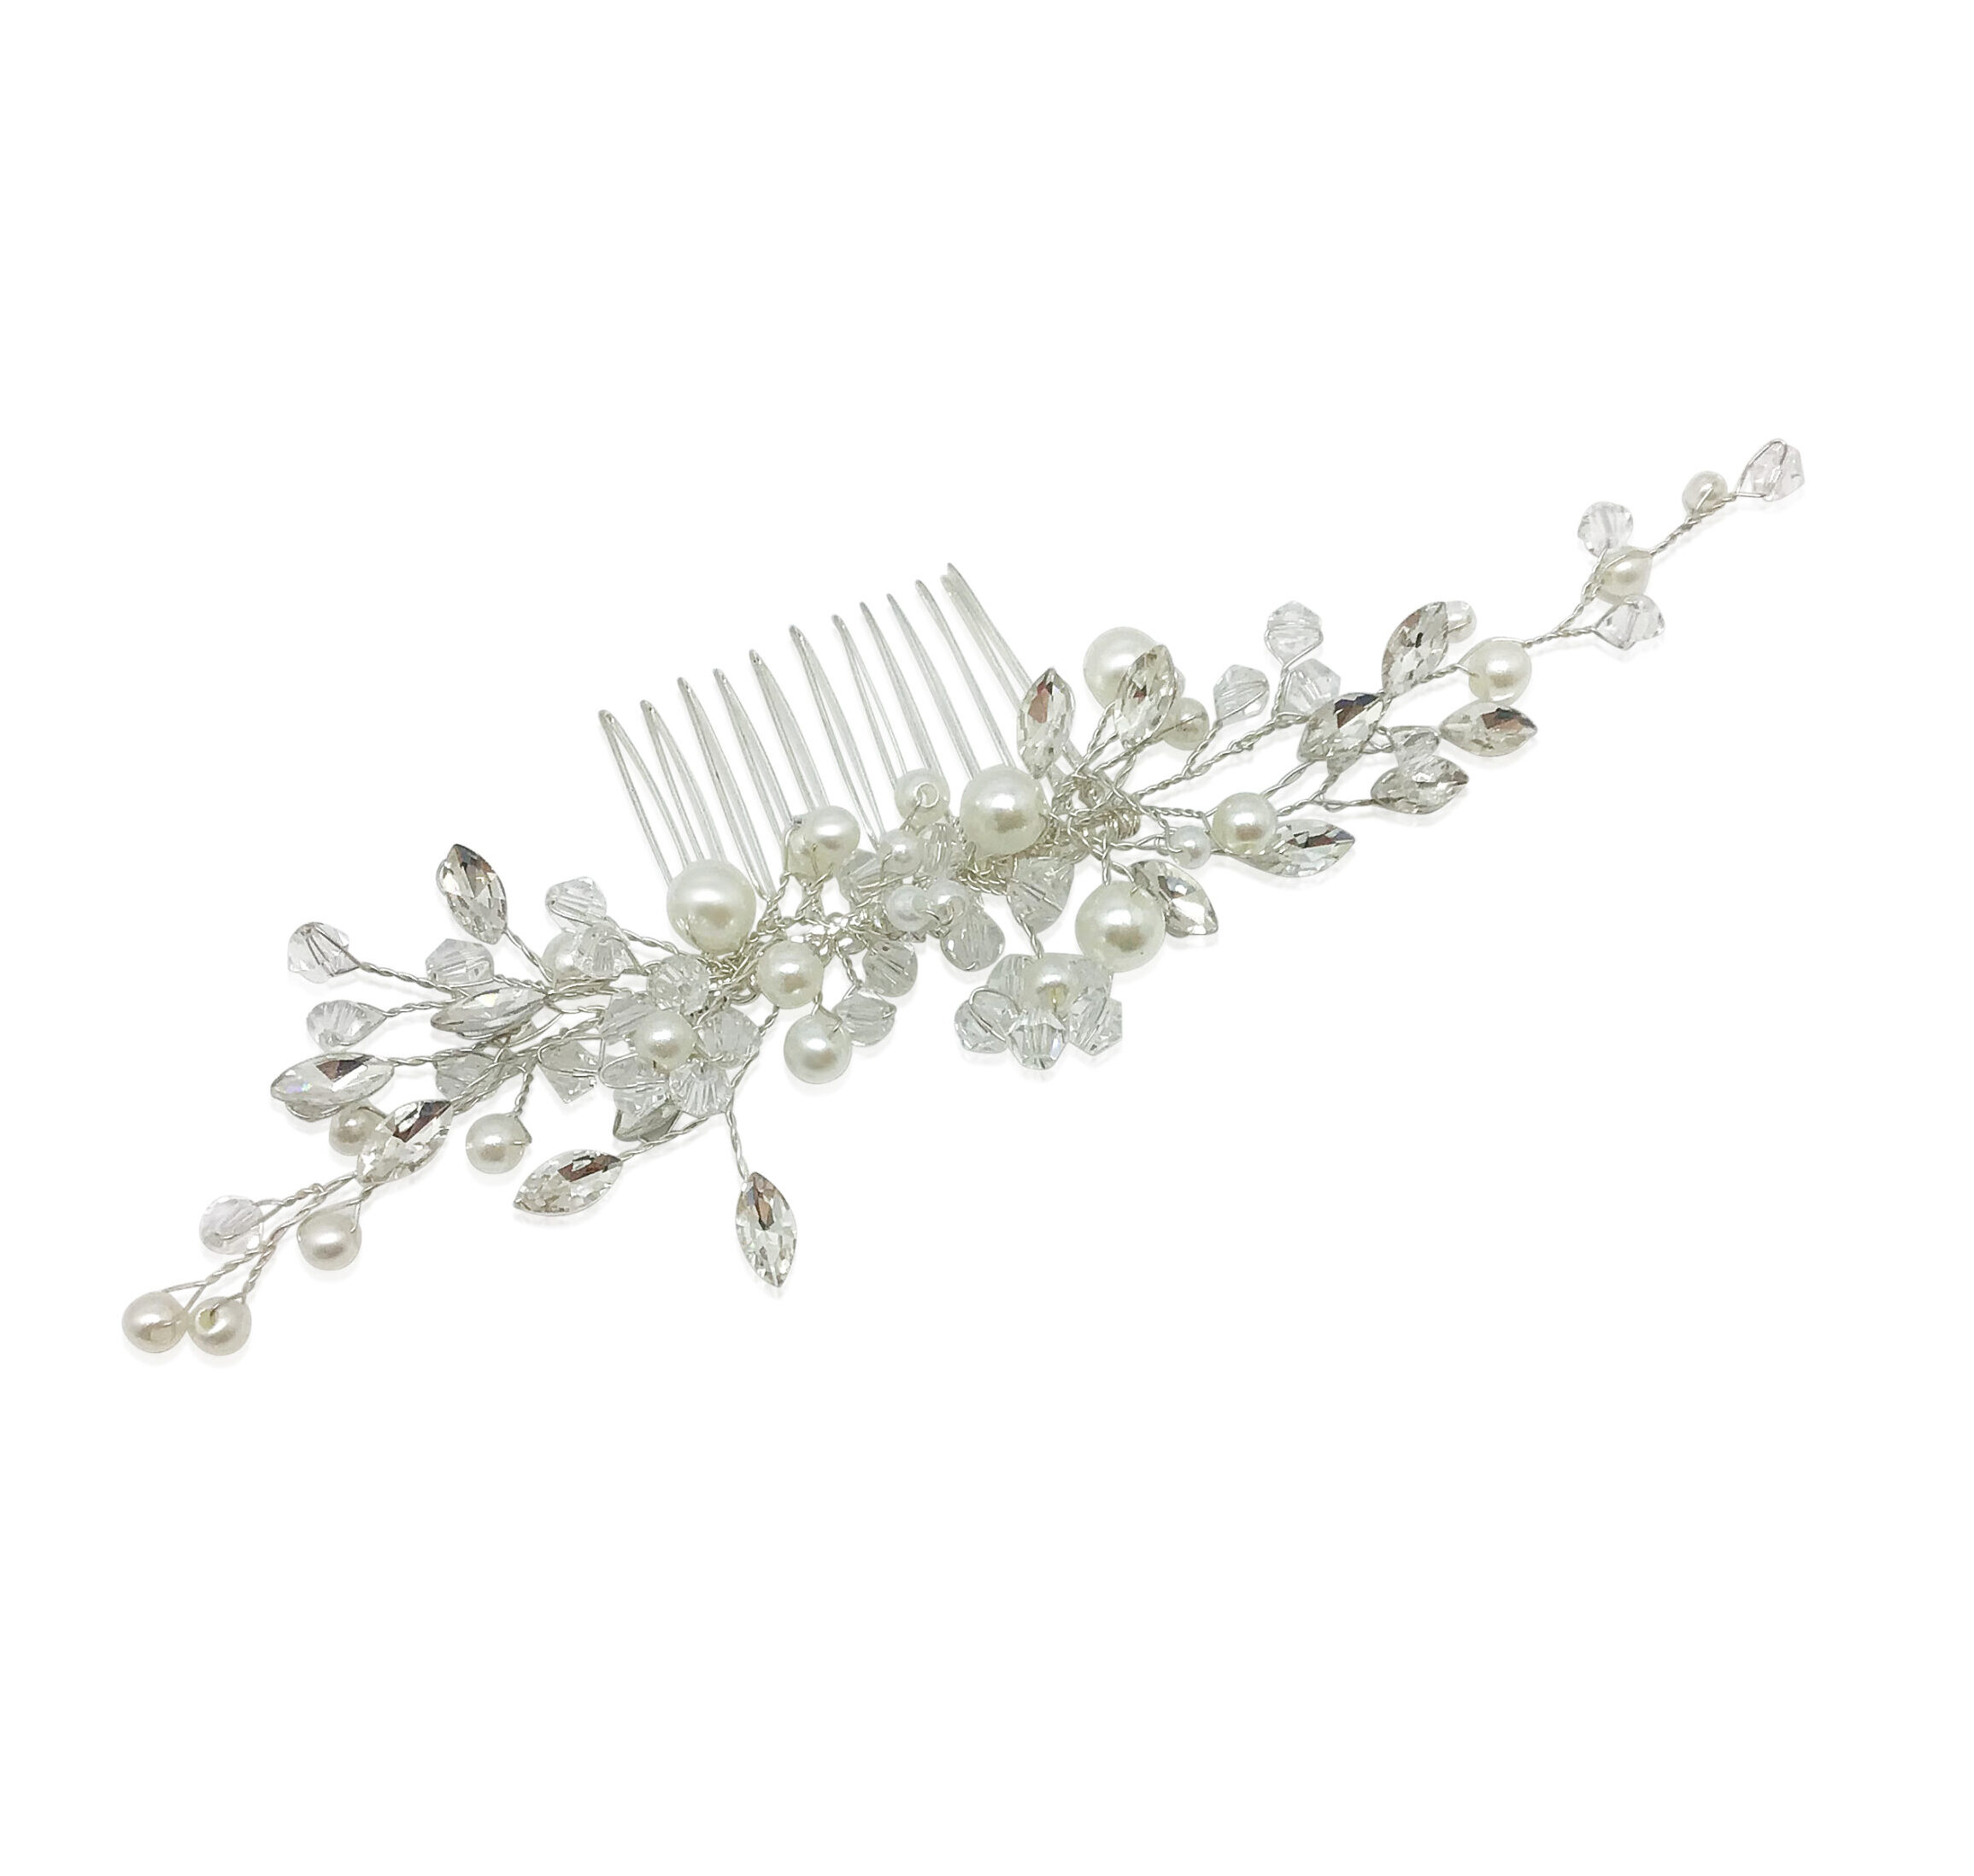 Pearl And Crystal Hair Comb|Jill|Jeanette Maree|Shop Online Now